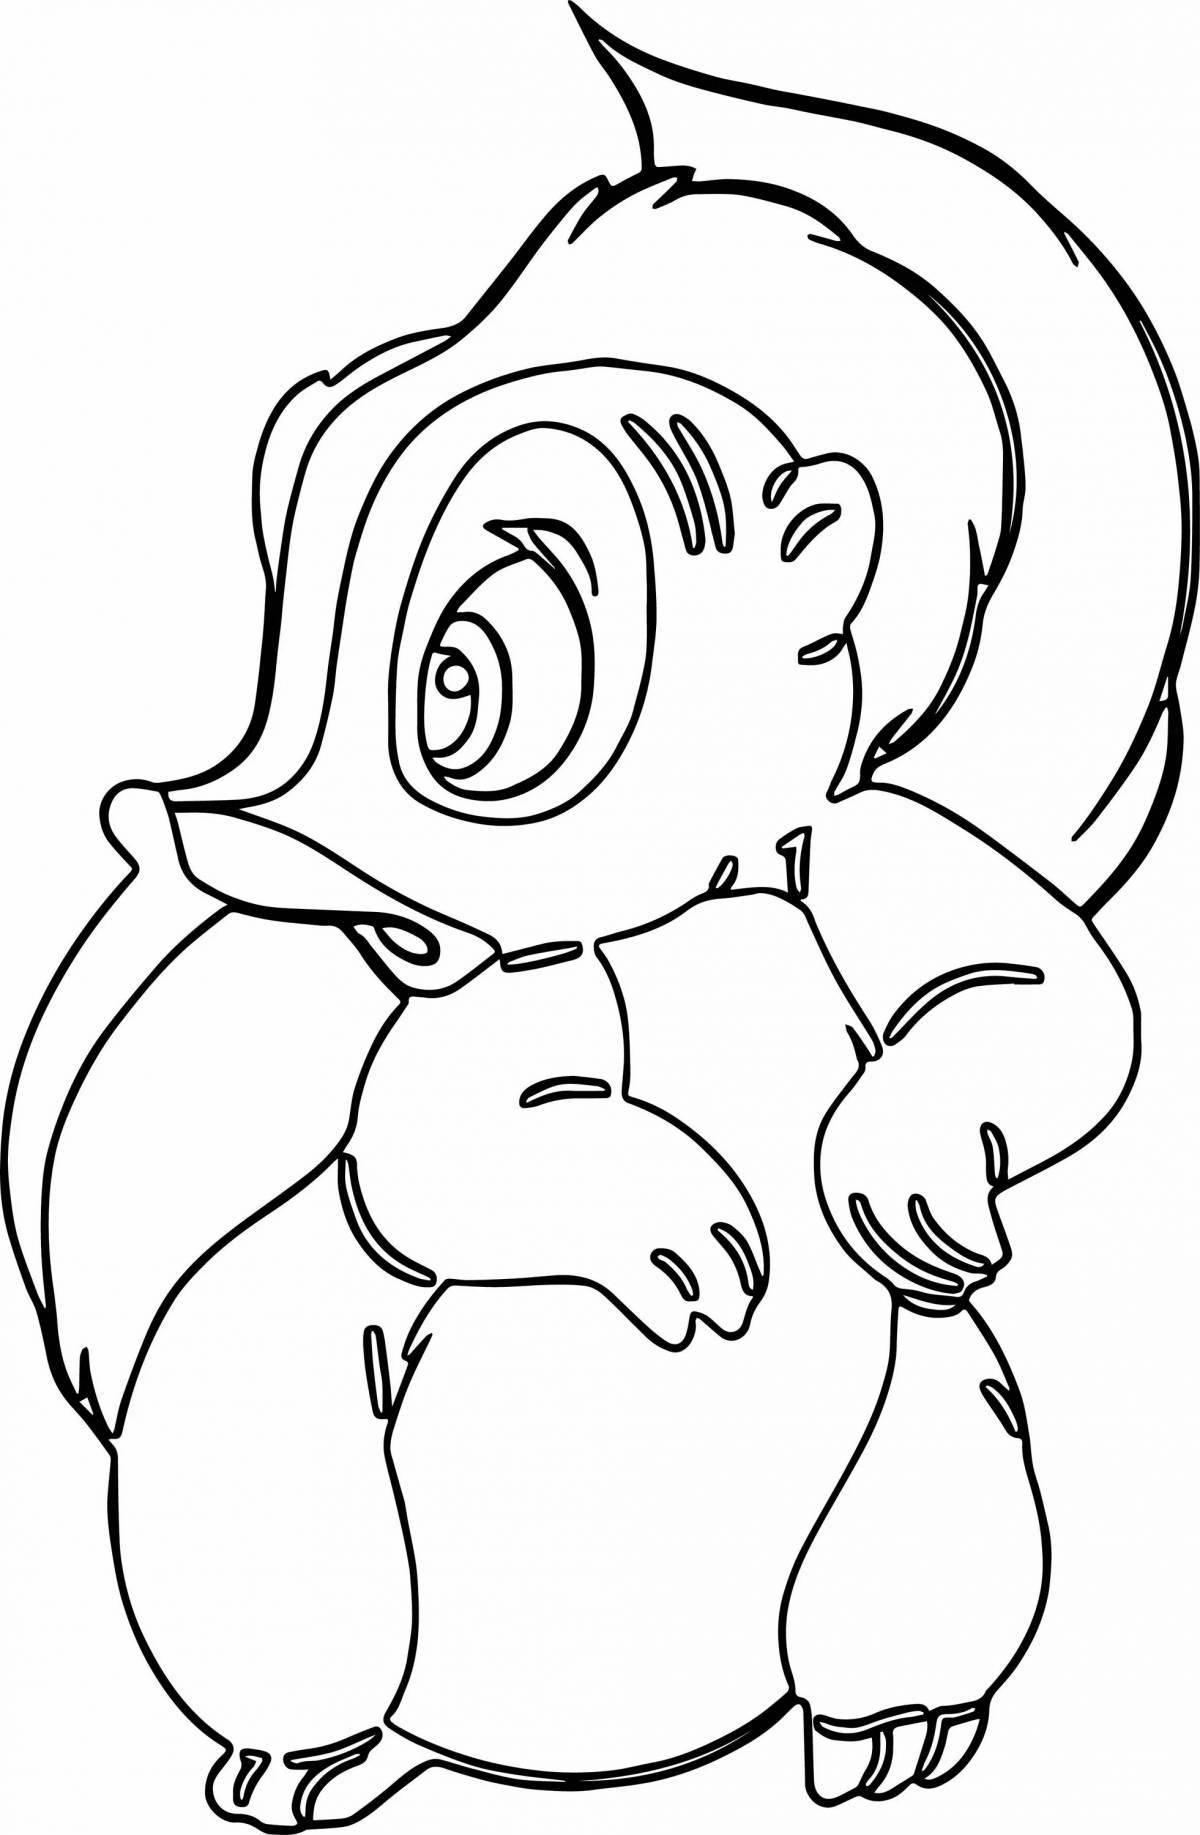 Witty skunk coloring page